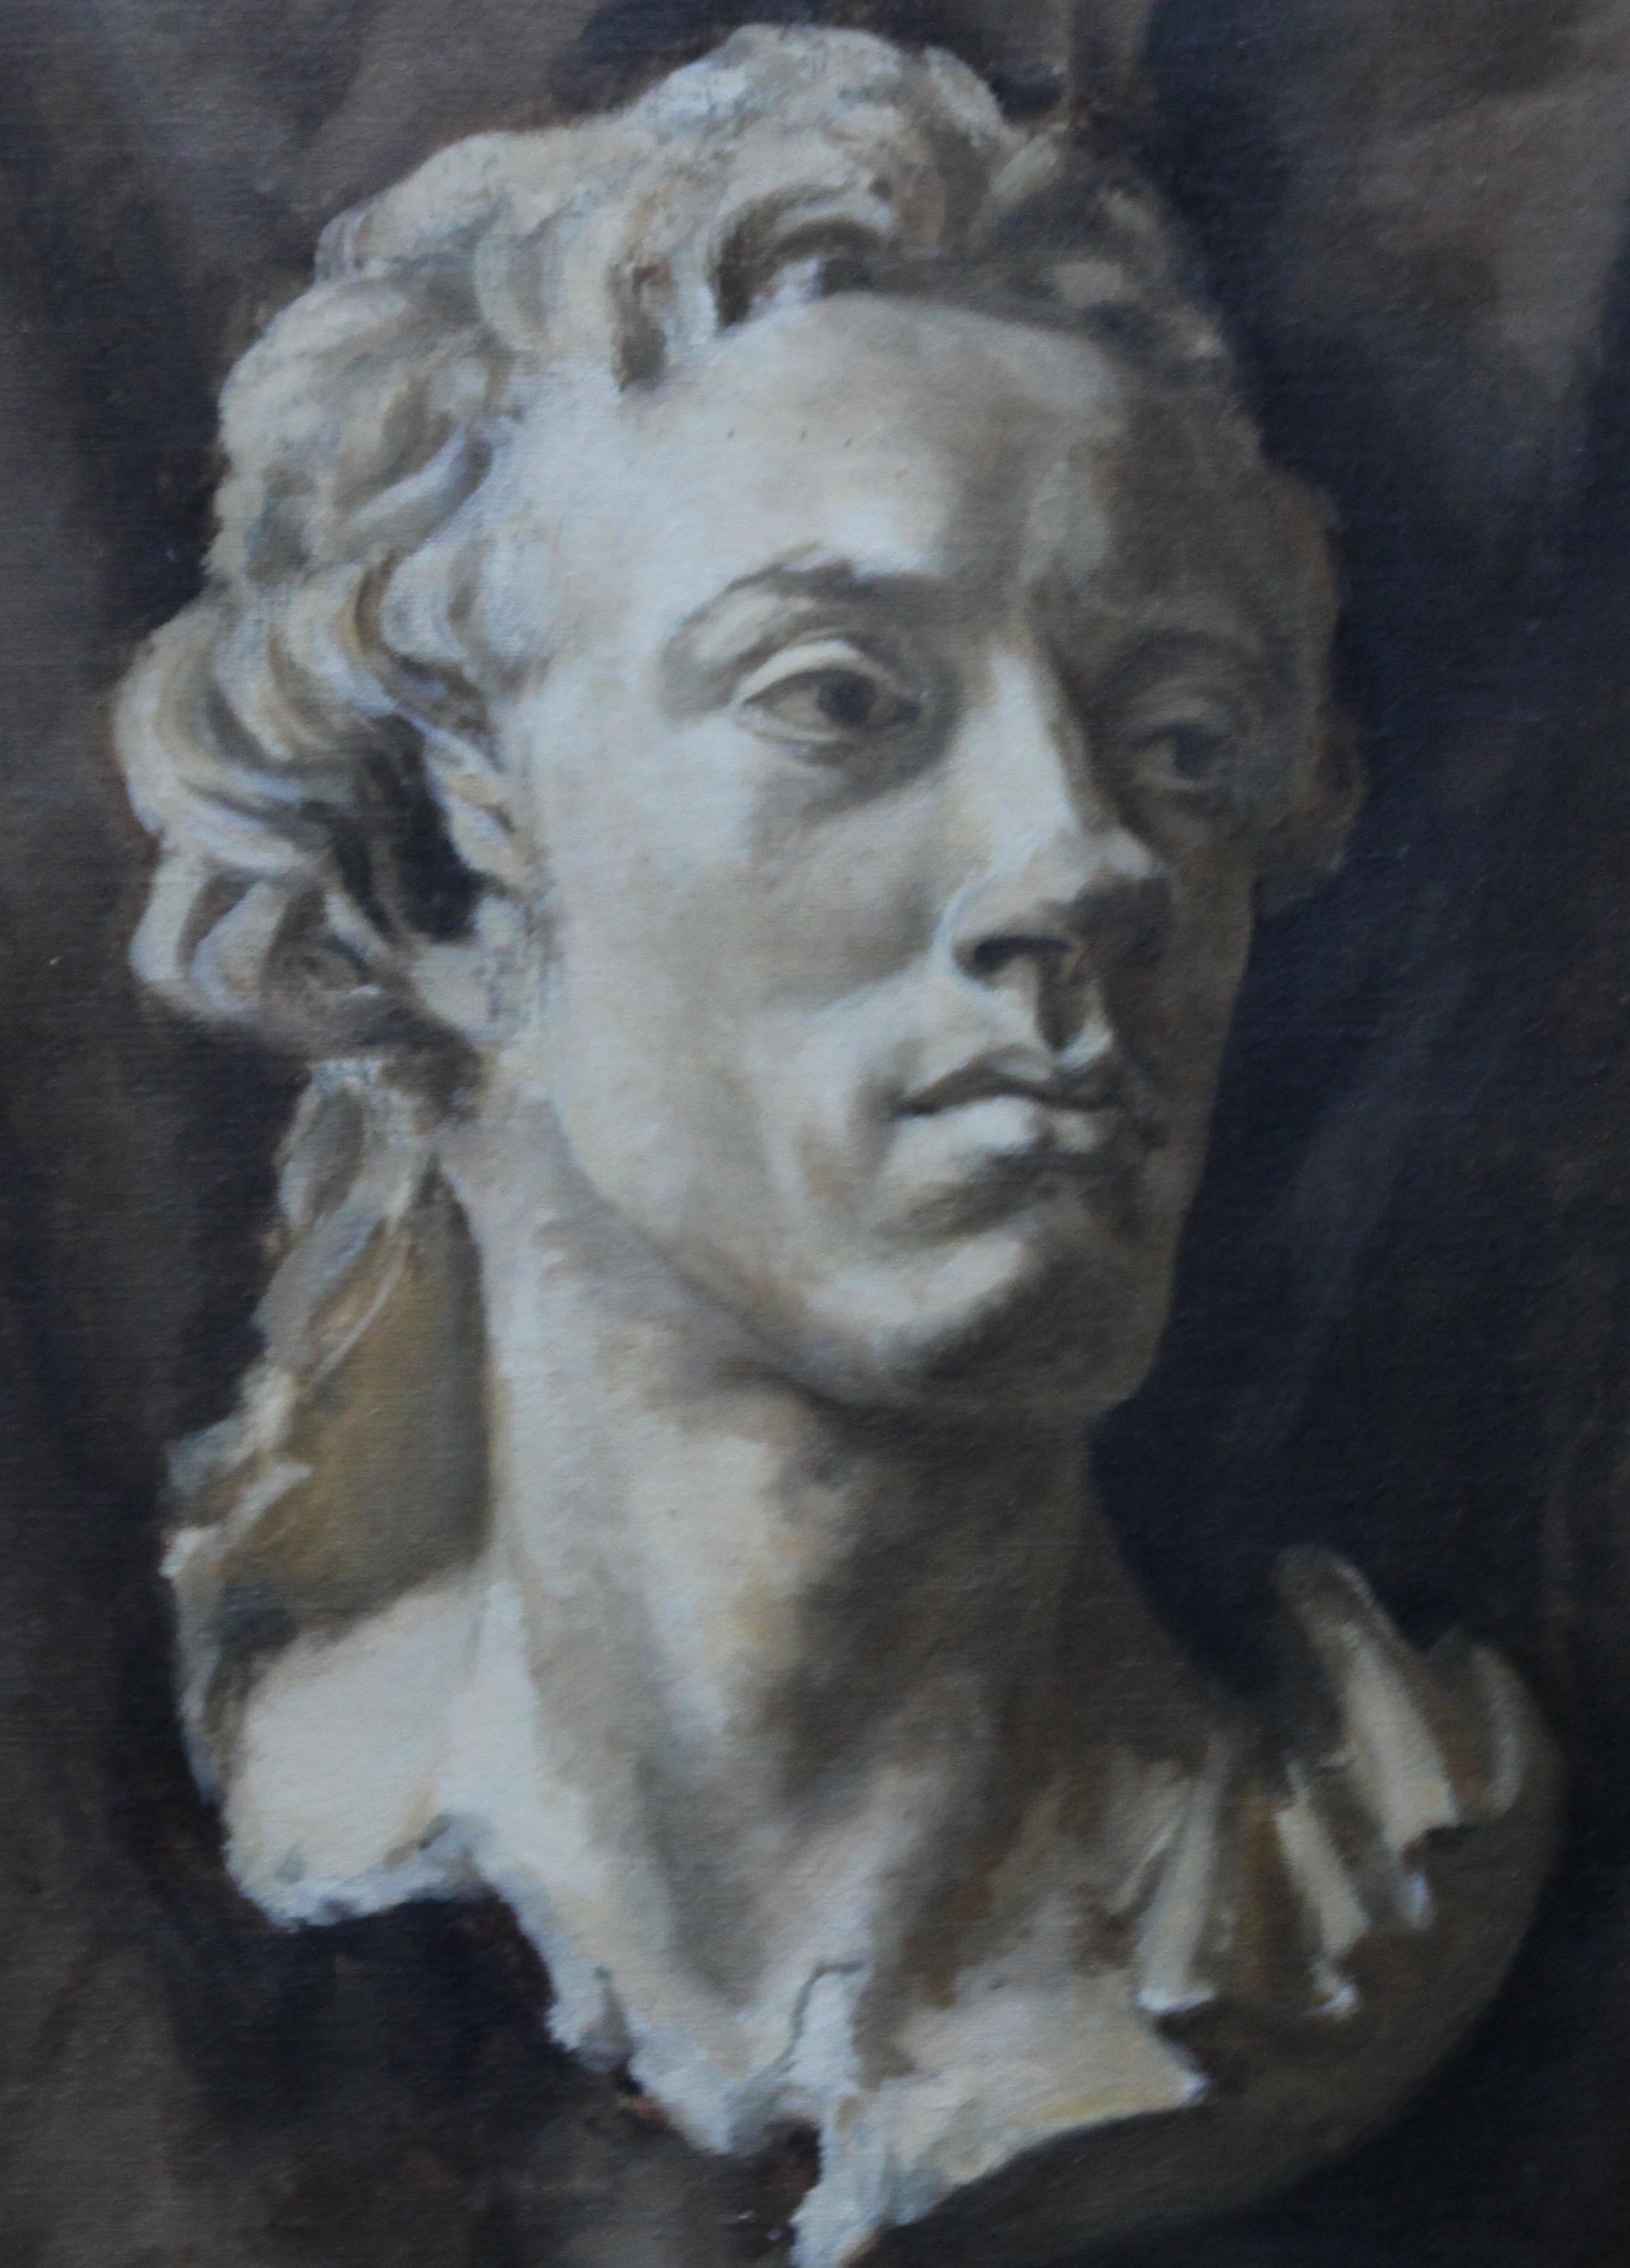 Study of a Marble Bust - British 40's Slade School art still life oil painting - Post-Impressionist Painting by E.A. Jay